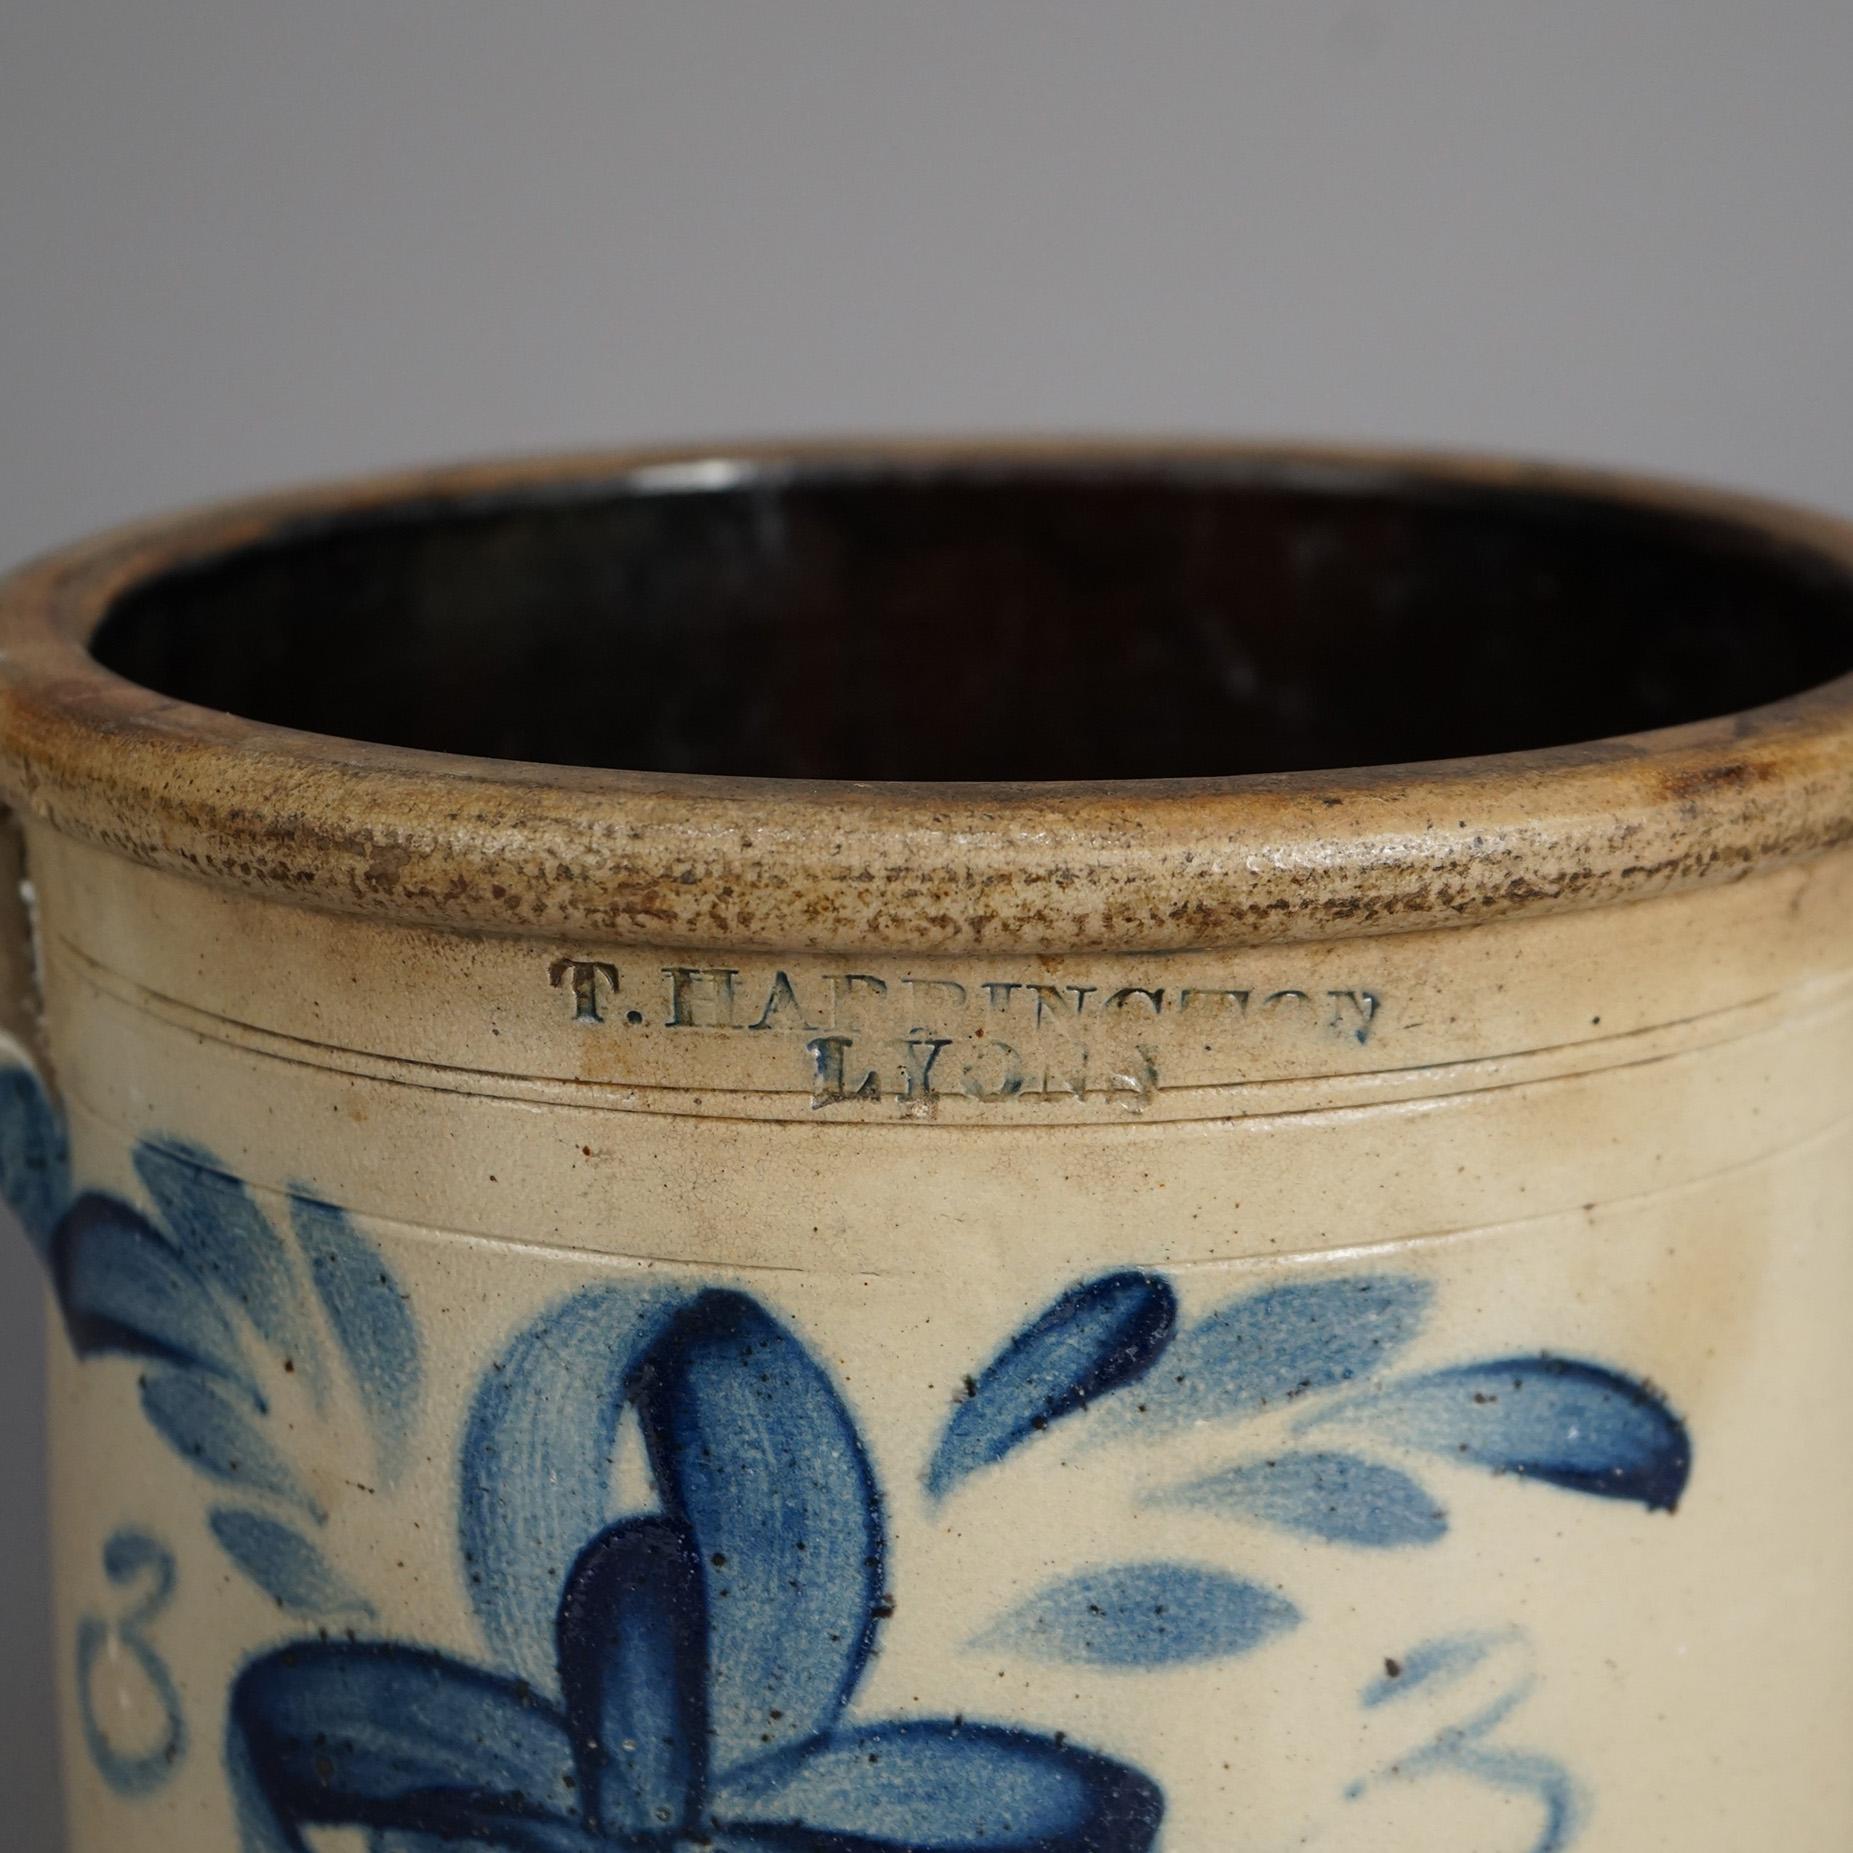 An antique T. Harrington Lyons crock offers salt glazed stoneware construction with double handles and blue decorated with stylized floral design, maker stamp as photographed, c1870

Measures - 10.5